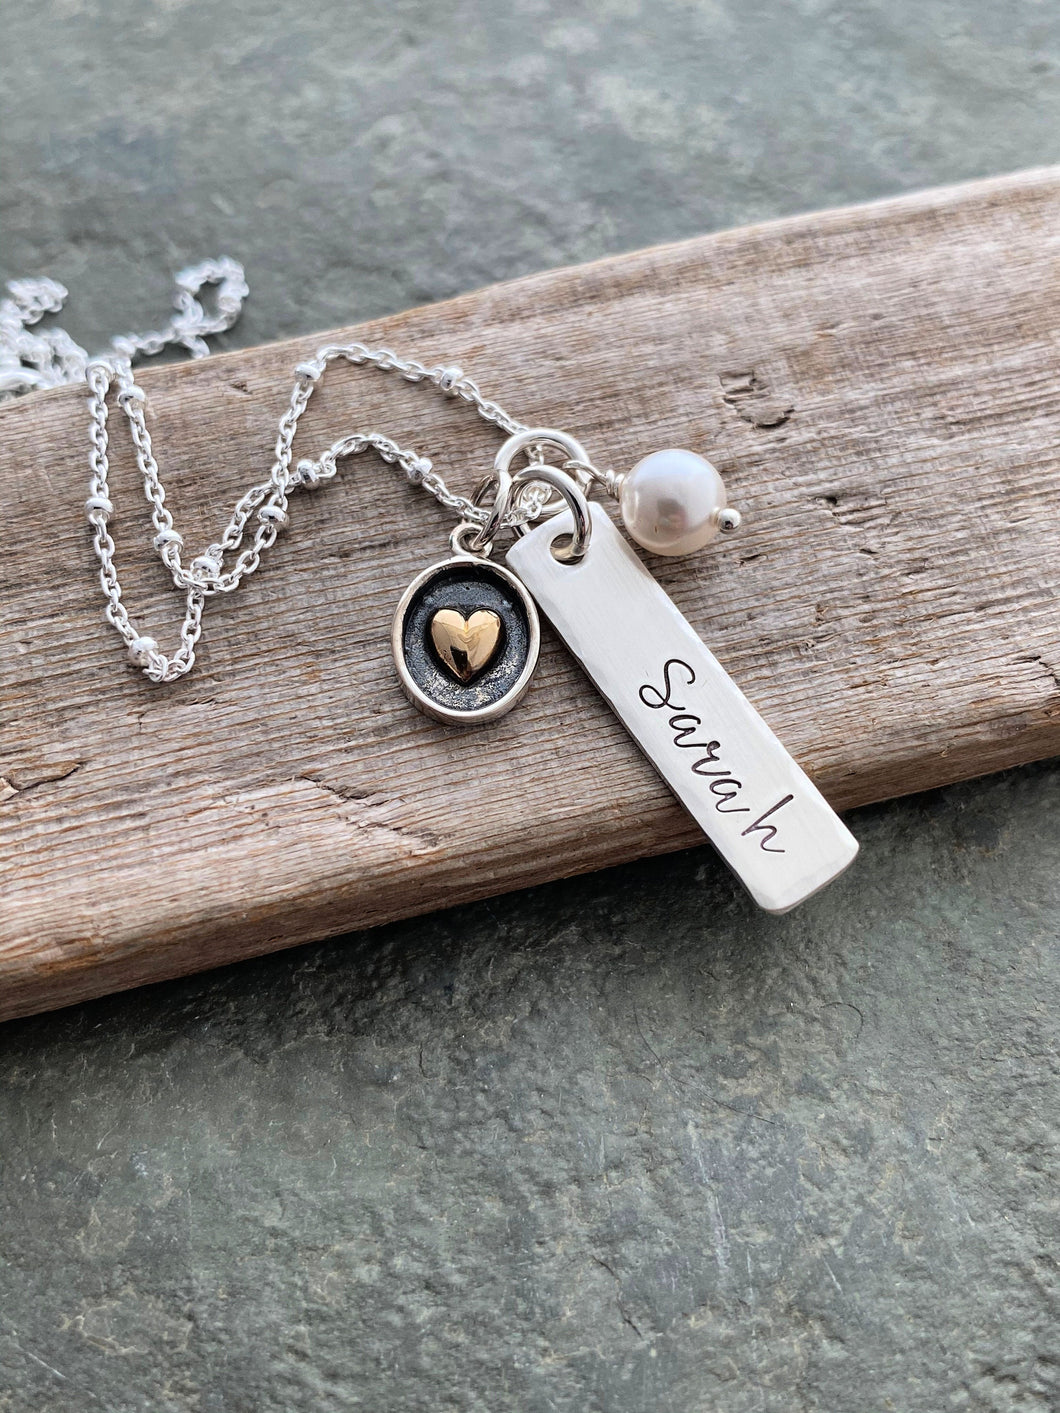 Personalized name necklace - sterling silver bar necklace with bronze gold heart charm and Swarovski crystal pearl - gift for new mom